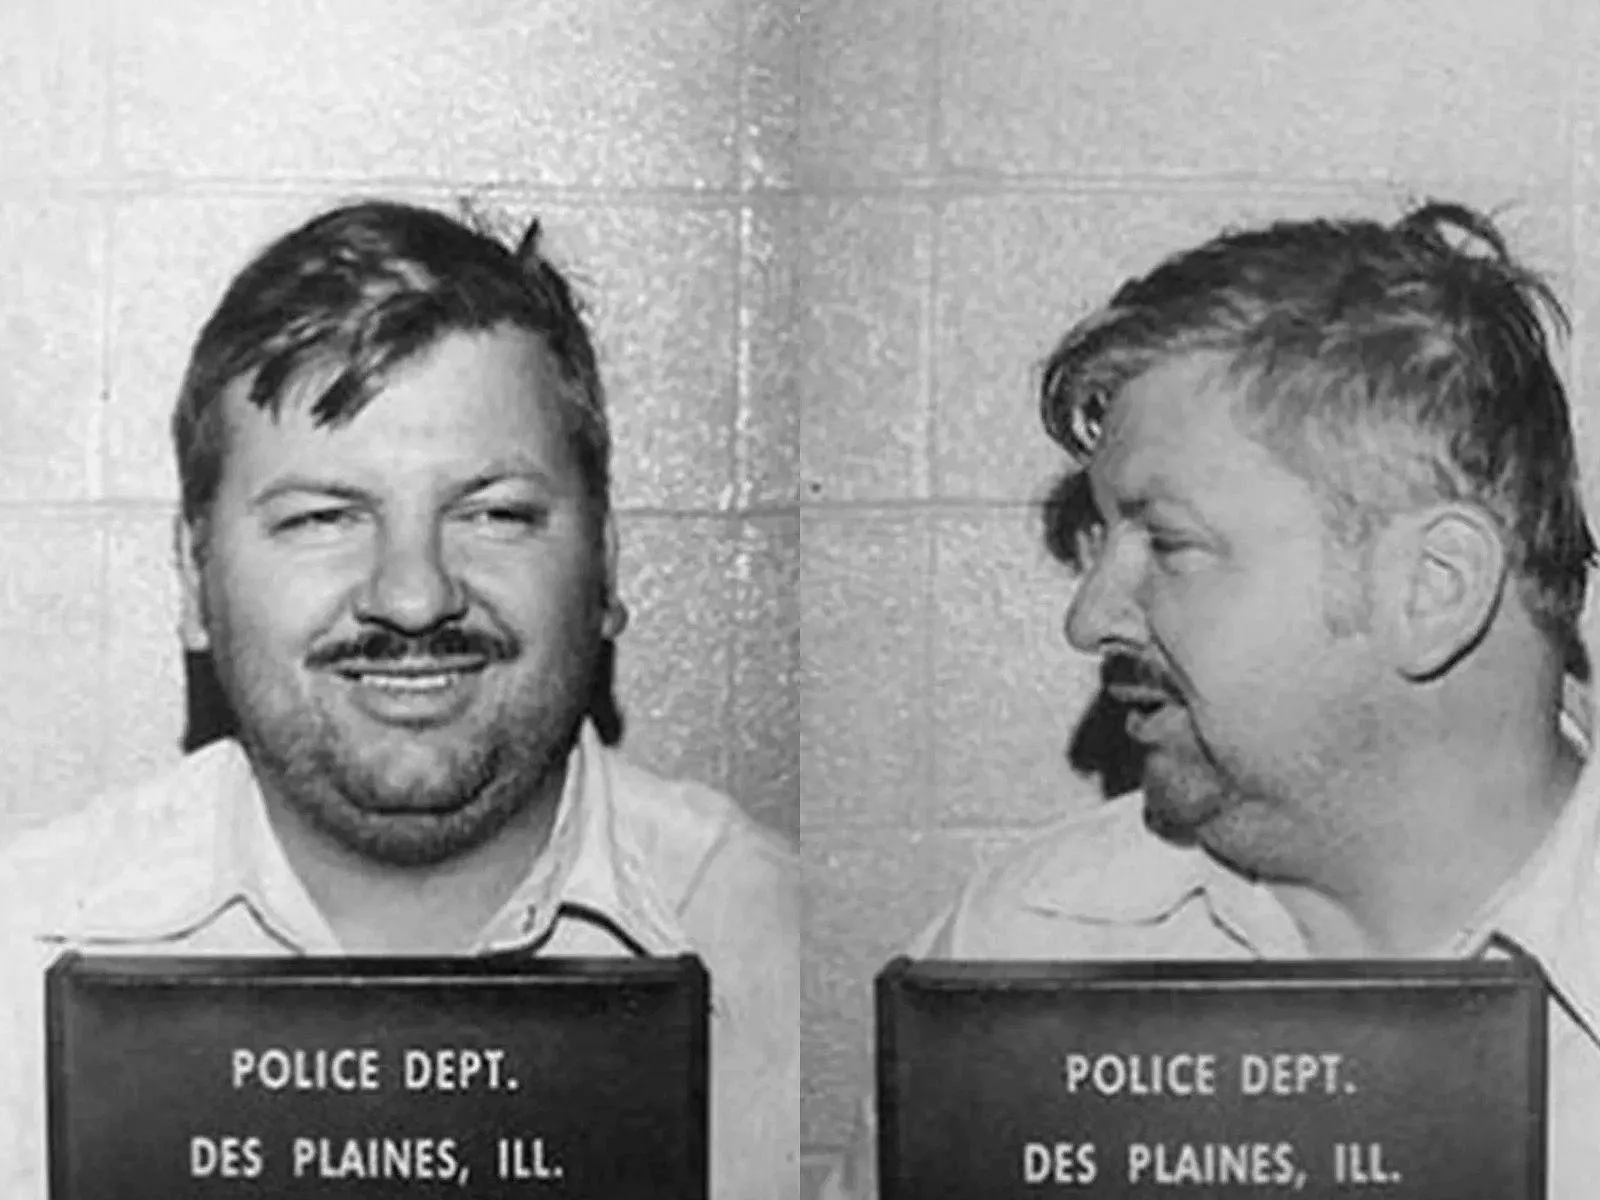 The Trial Of John Wayne Gacy - A Overview Of The Murder Trial